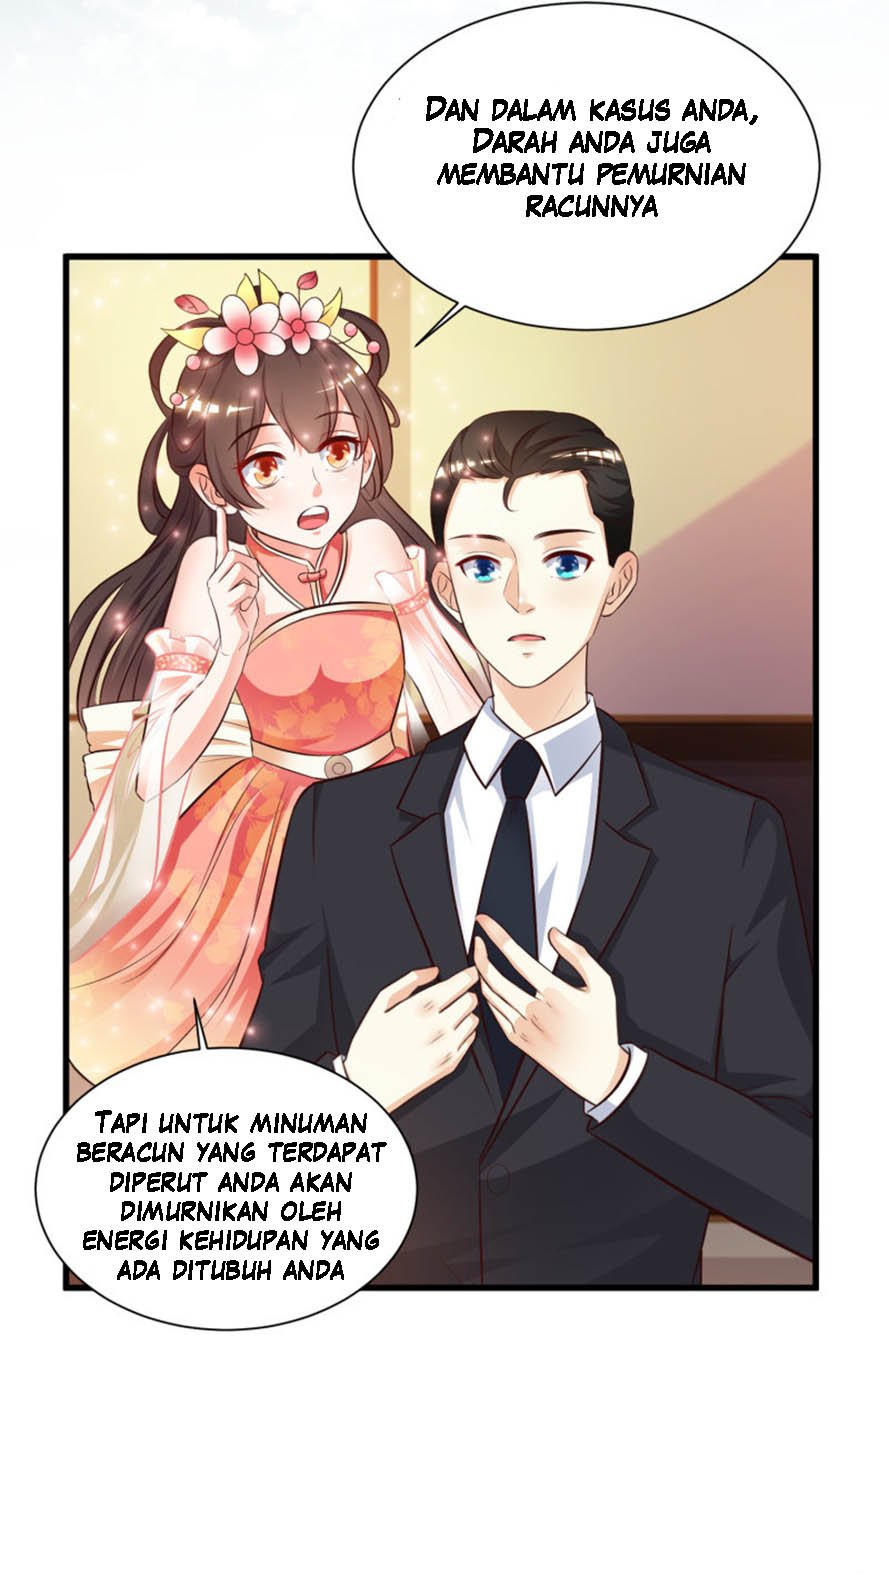 The Strongest Peach Blossom Chapter 11